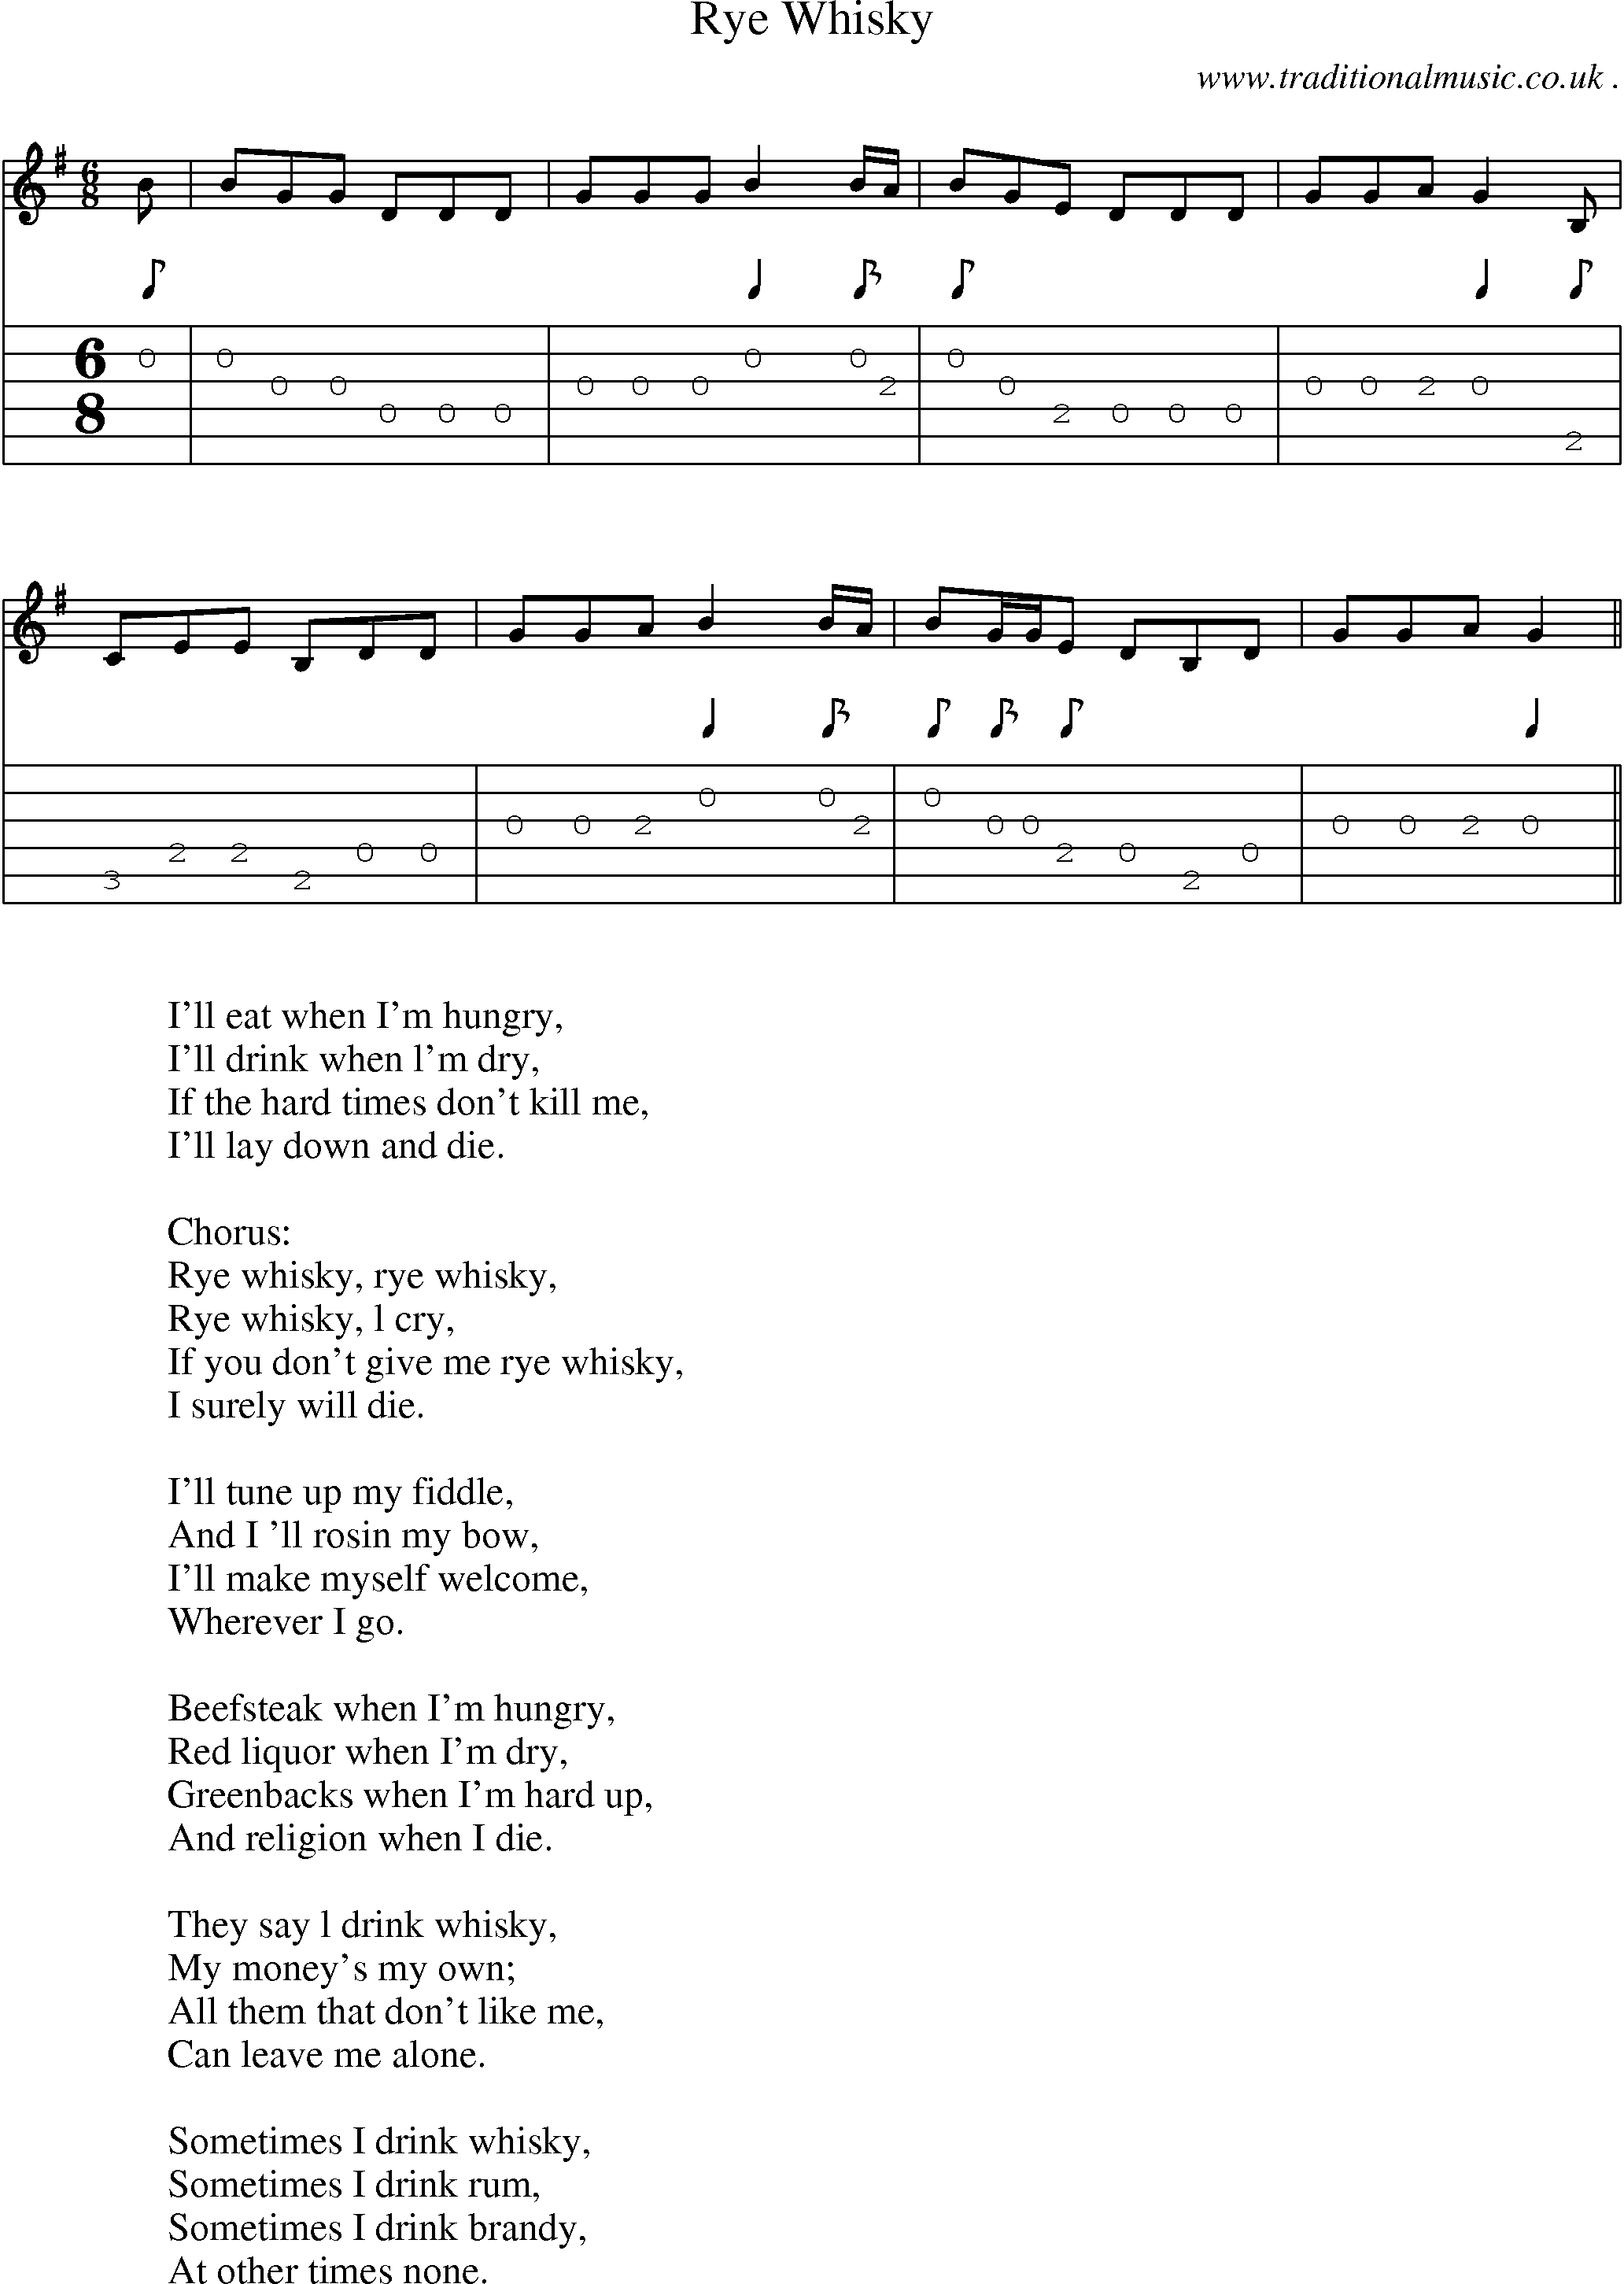 Sheet-Music and Guitar Tabs for Rye Whisky